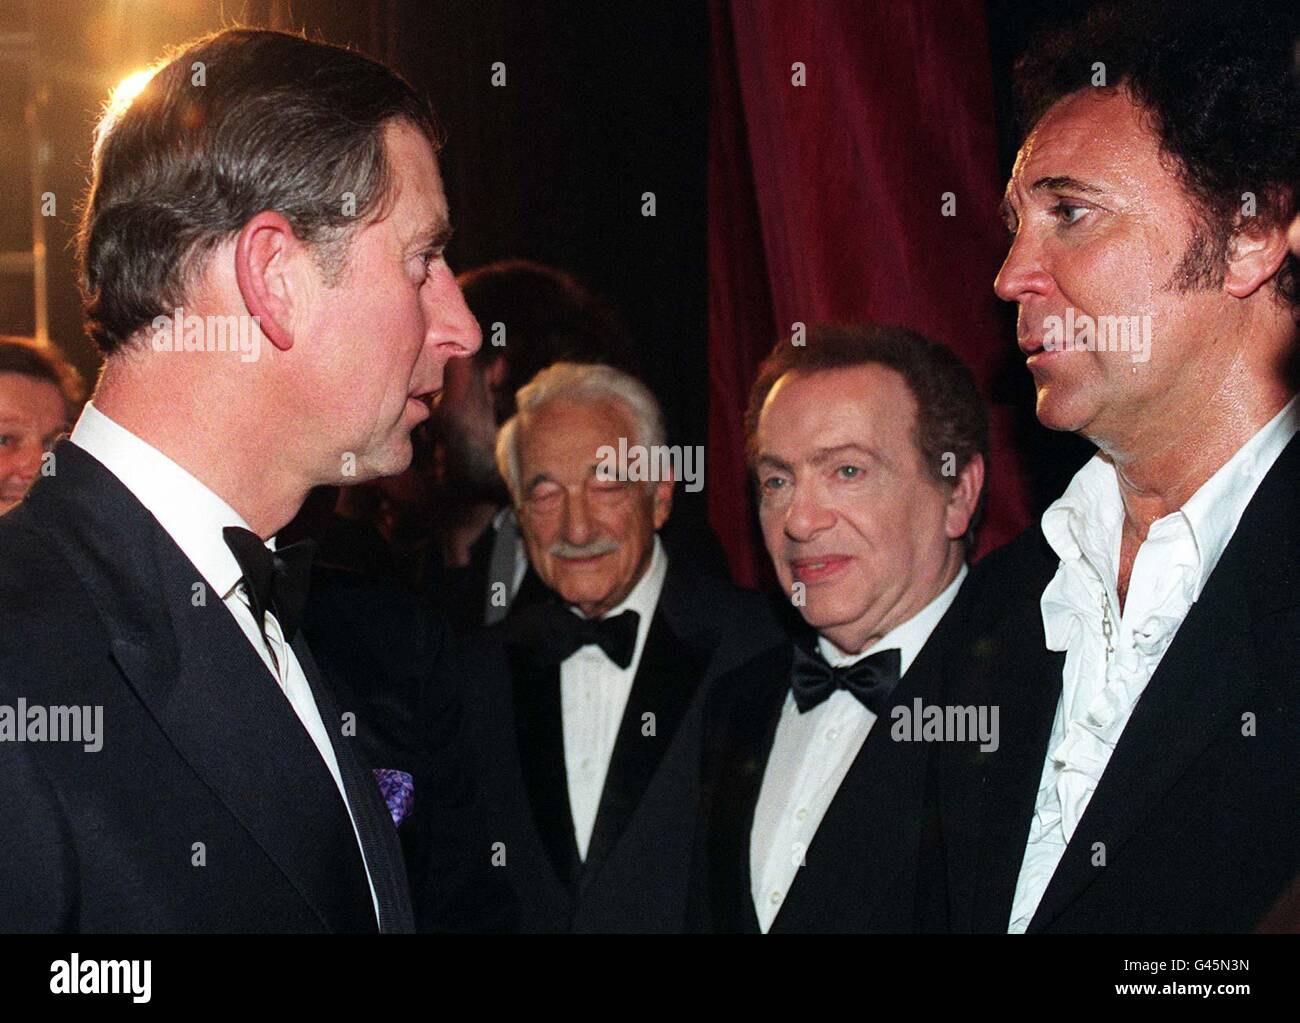 The Prince of Wales (left) met with Welsh singer Tom Jones who was appearing at The Royal Variety Performance at the Dominion Theatre in London tonight (Monday). Photo by Sean Dempsey/PA (WPA Rota) Stock Photo